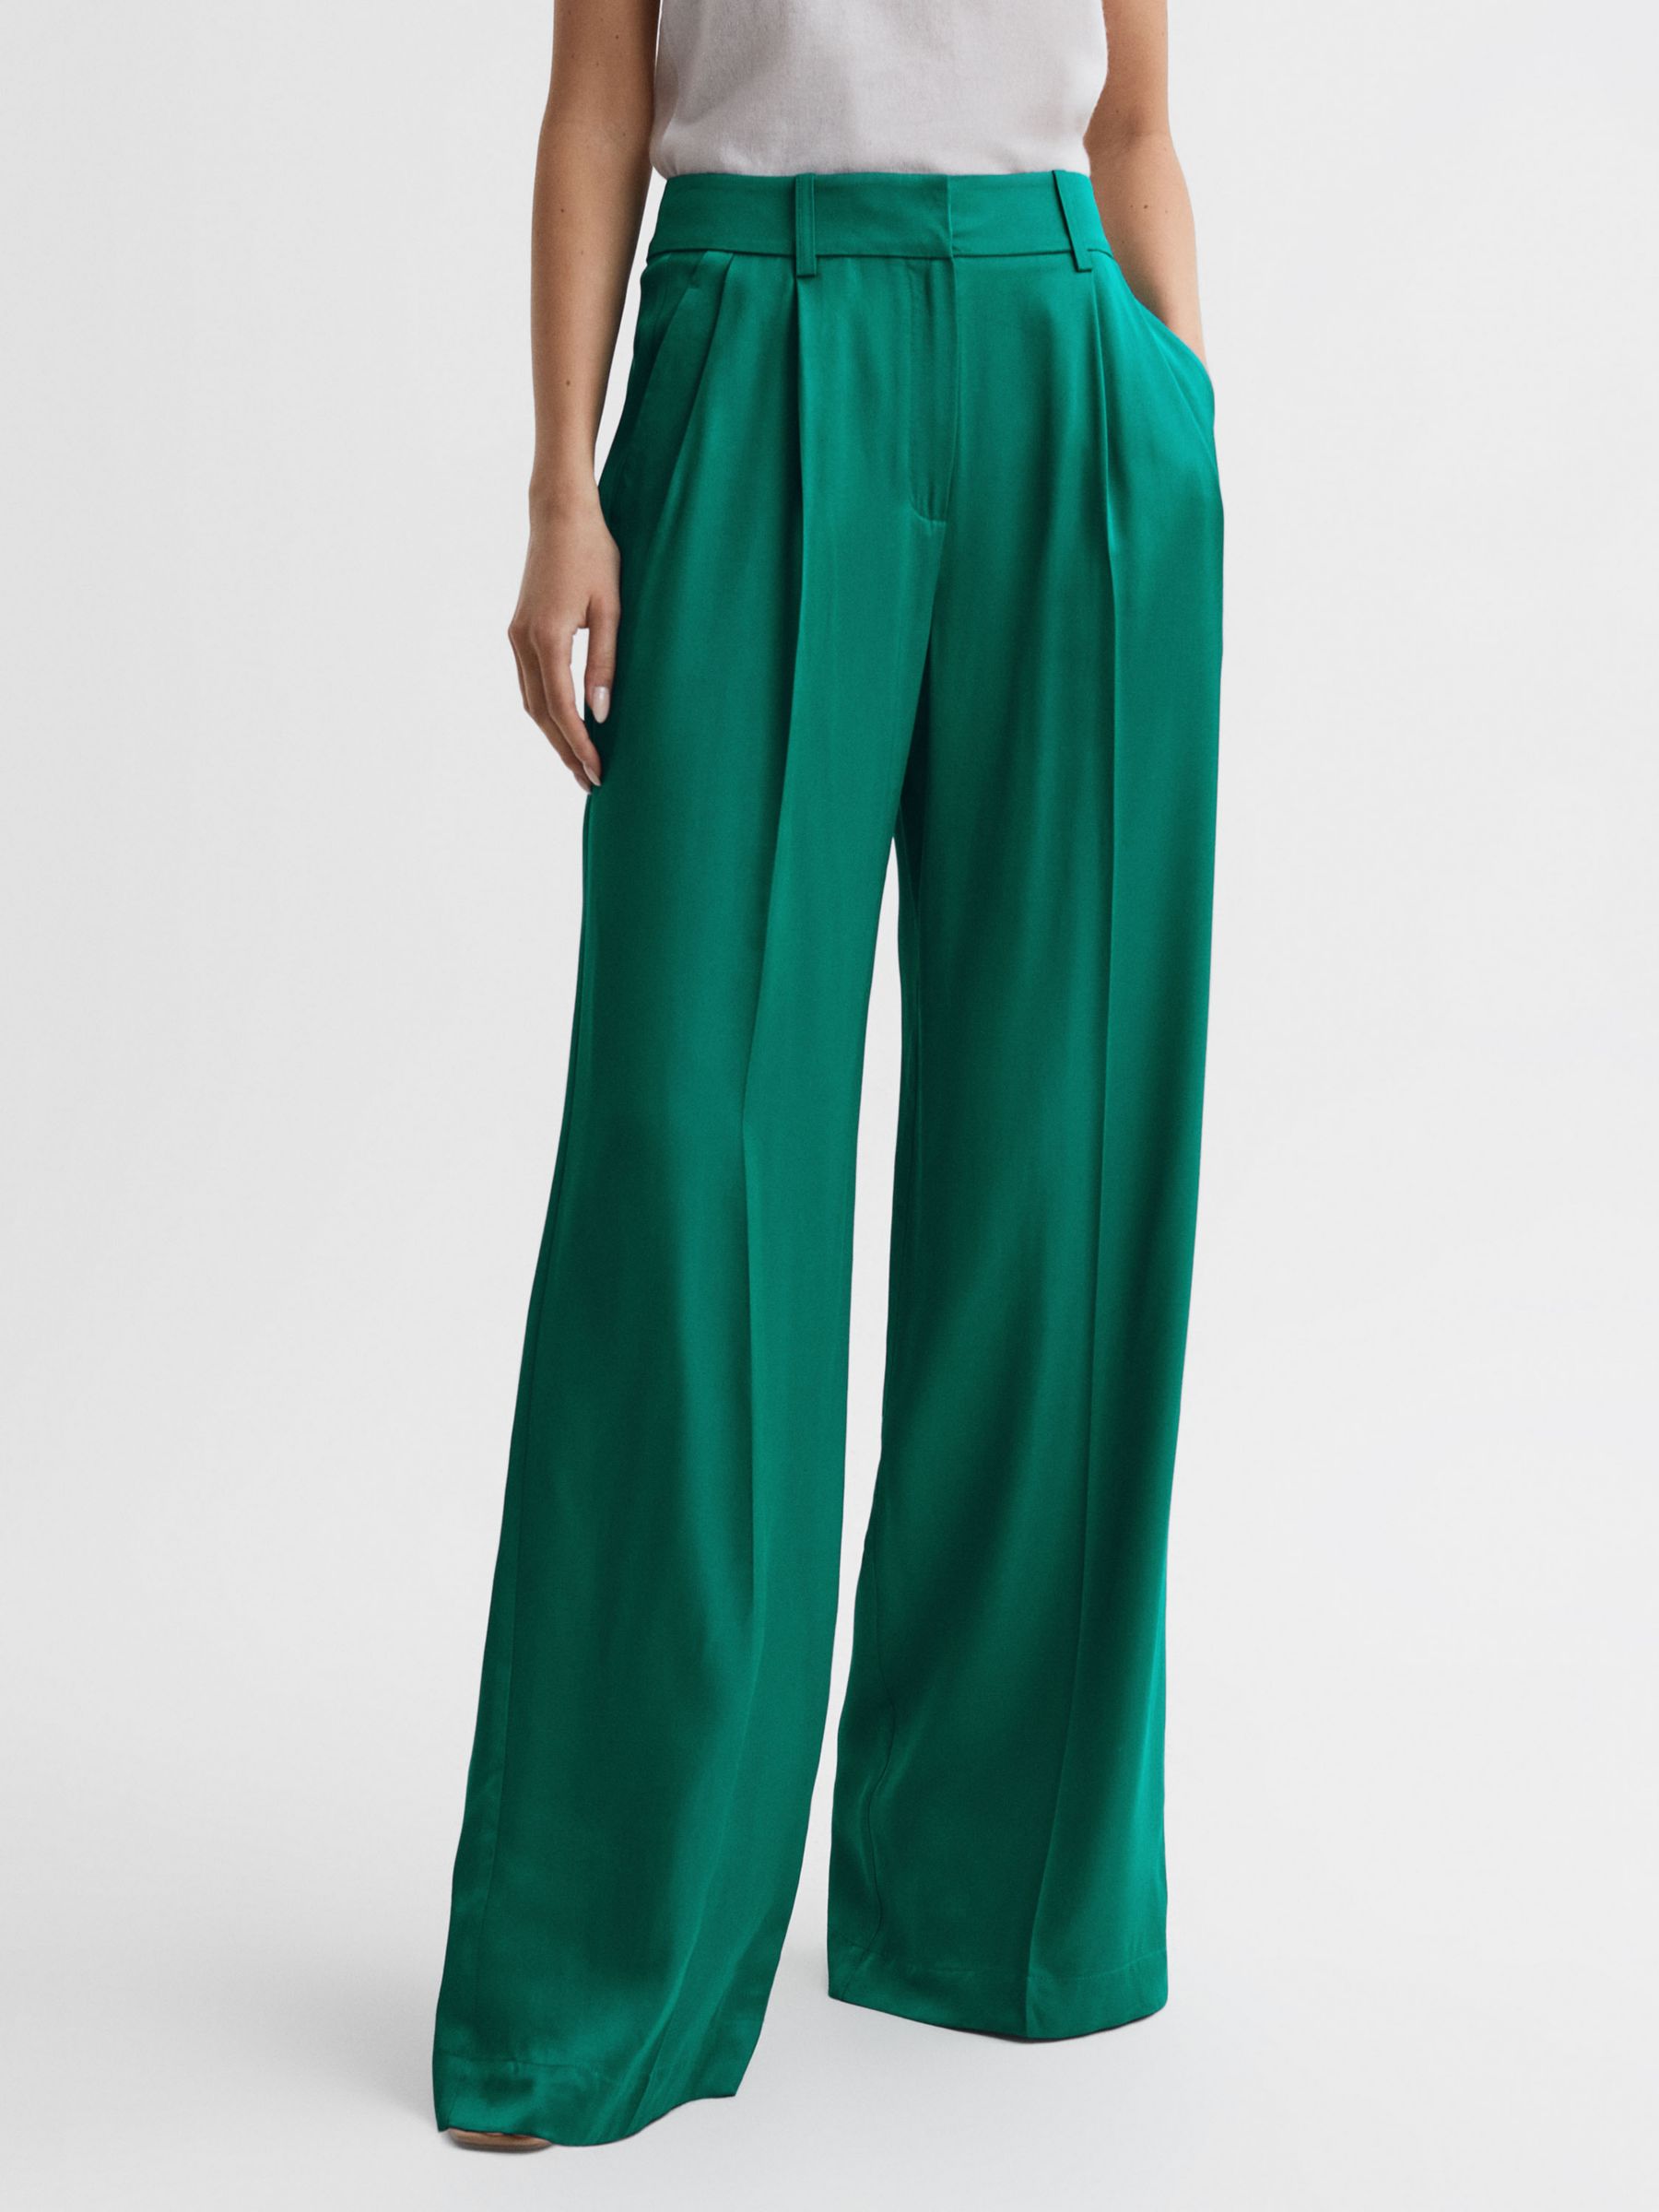 Reiss Rina Pleat Front Wide Leg Trousers, Green at John Lewis & Partners